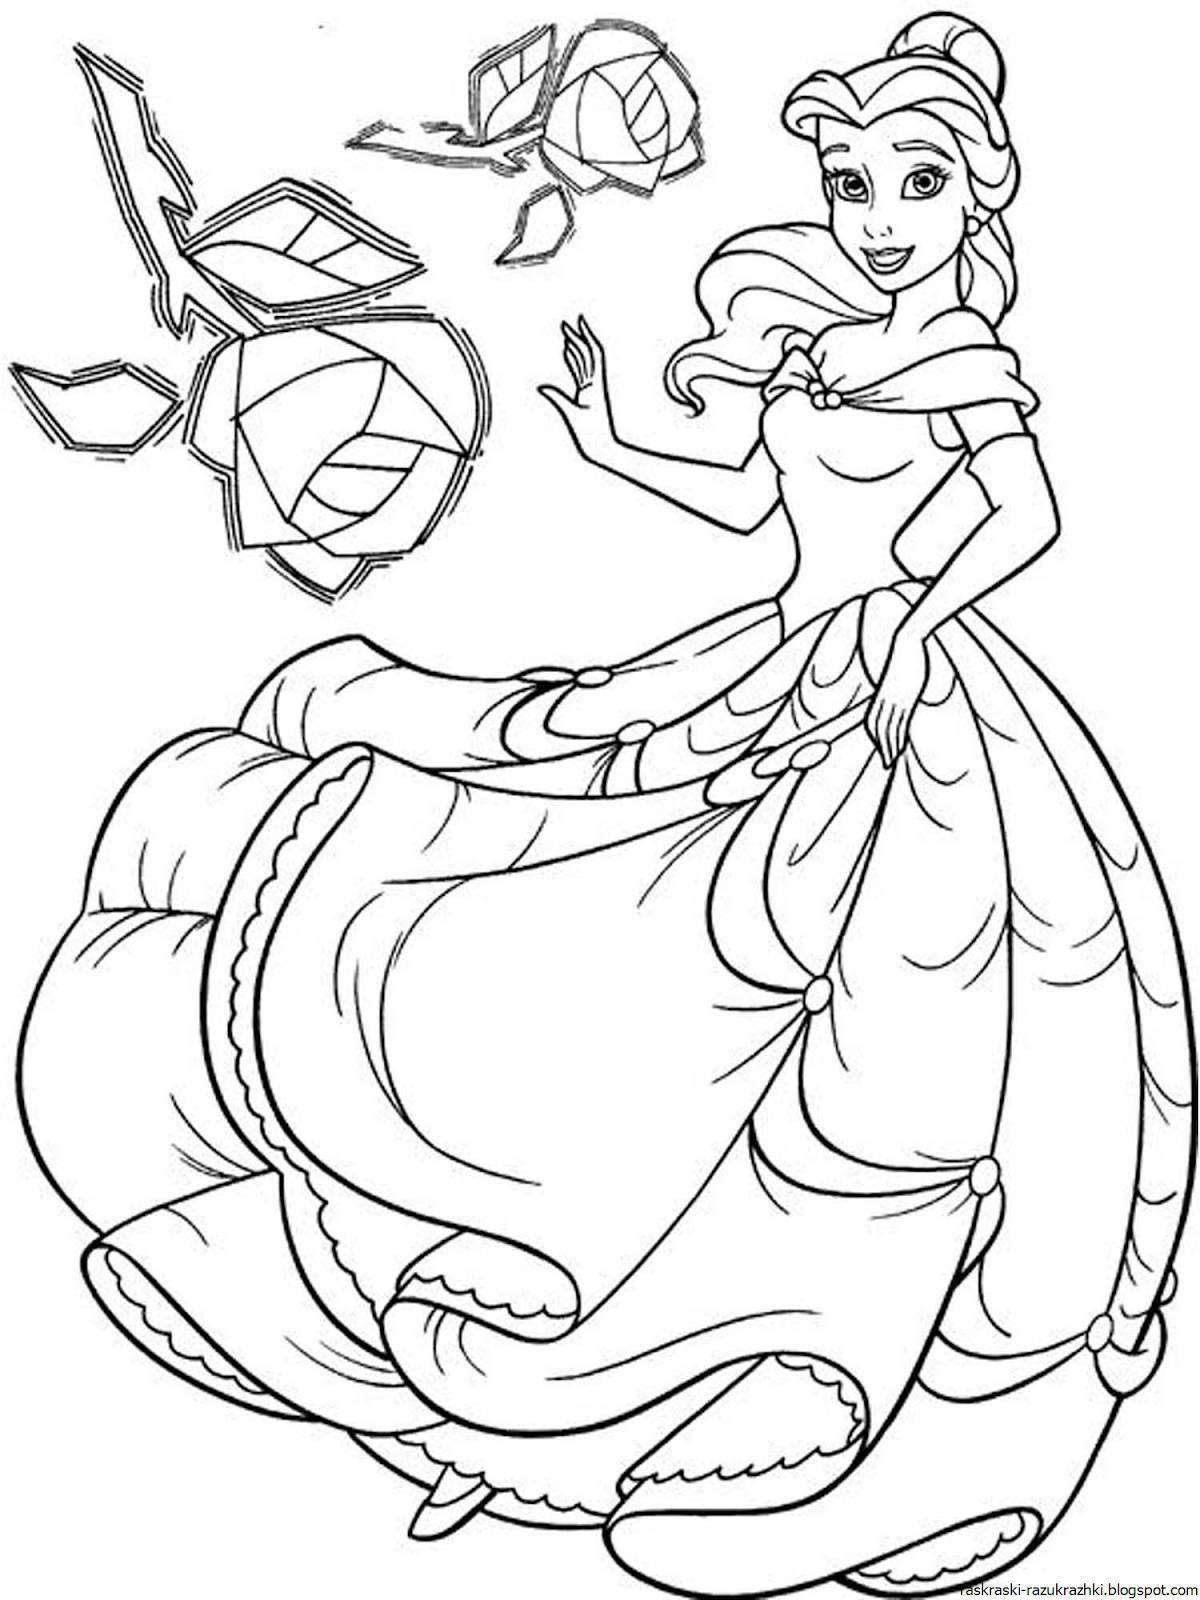 Colouring dazzling belle